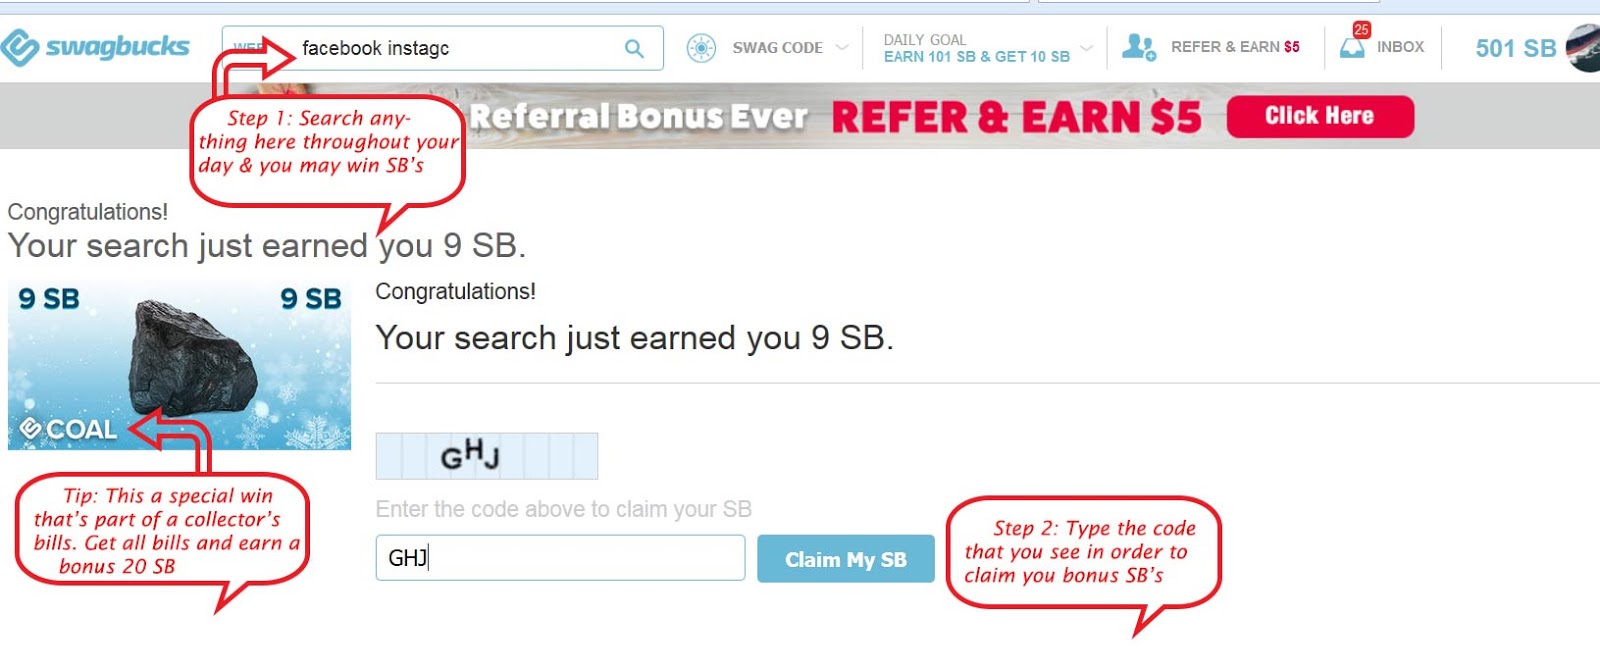 Is Swagbucks Worth the Time? My Official Swagbucks Review